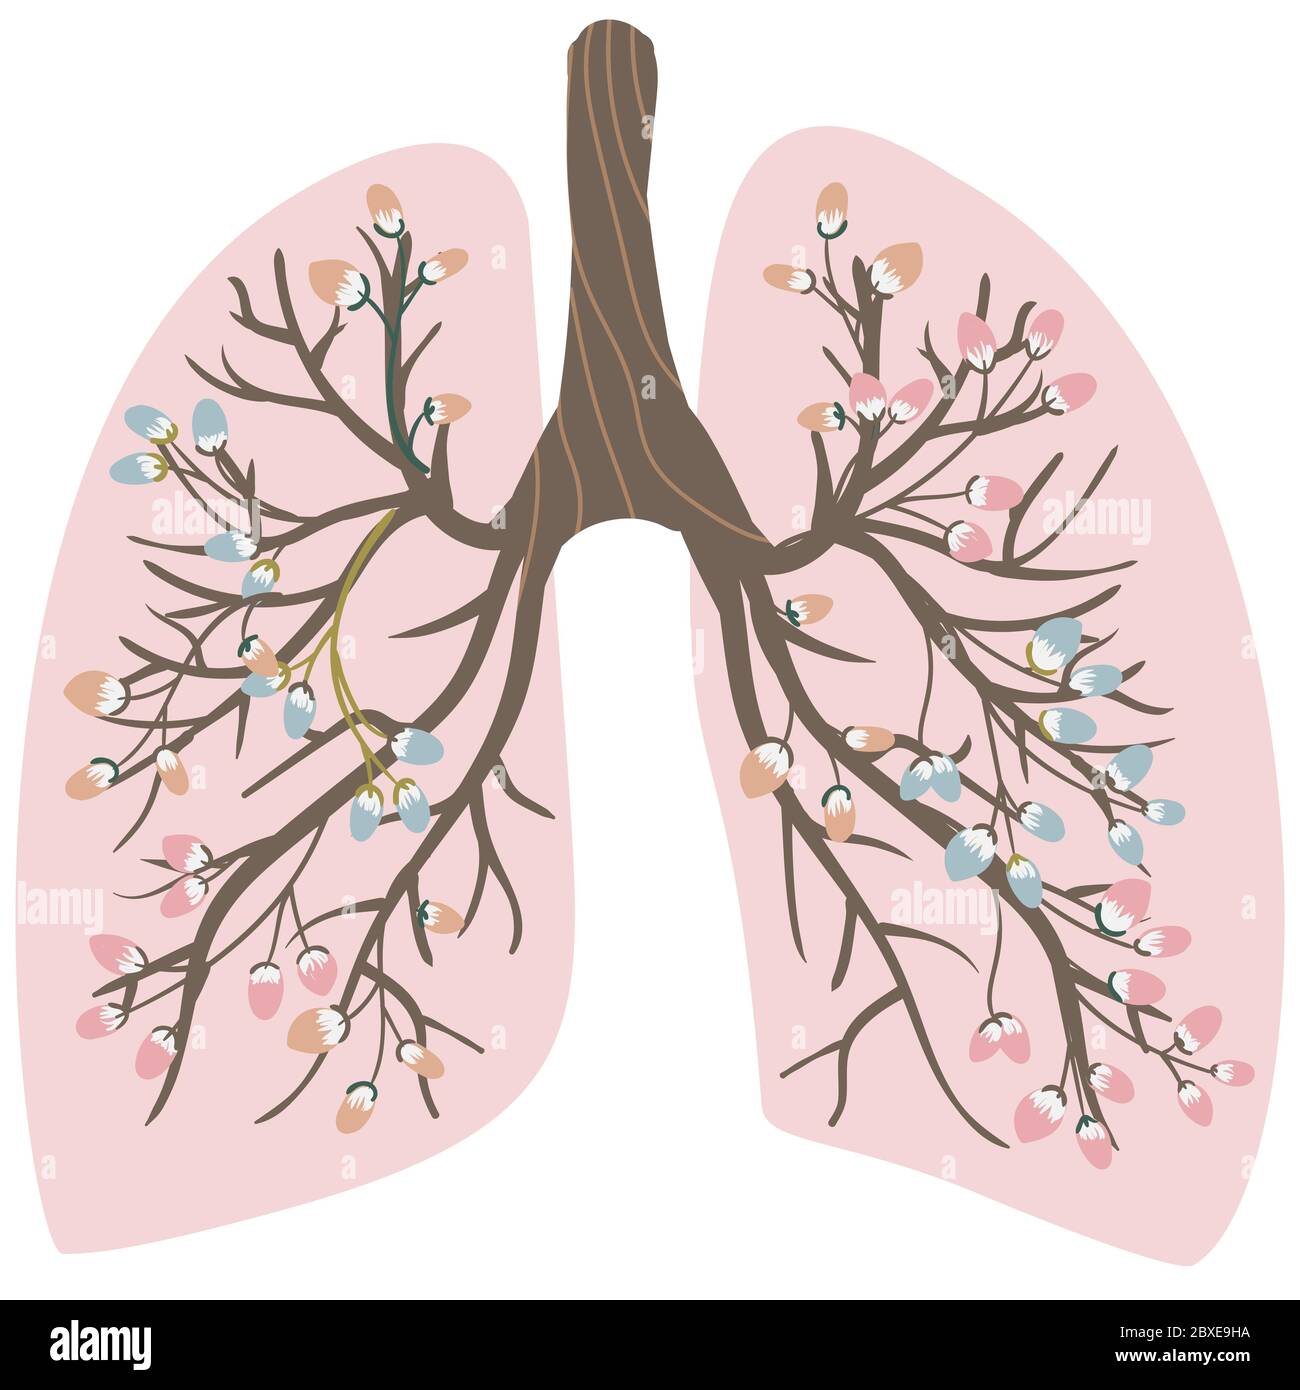 Blooming, healthy human lungs. World-wide day against pneumonia. The fight against tuberculosis in medicine. Smoker's lungs and healthy. Pink lungs in Stock Vector